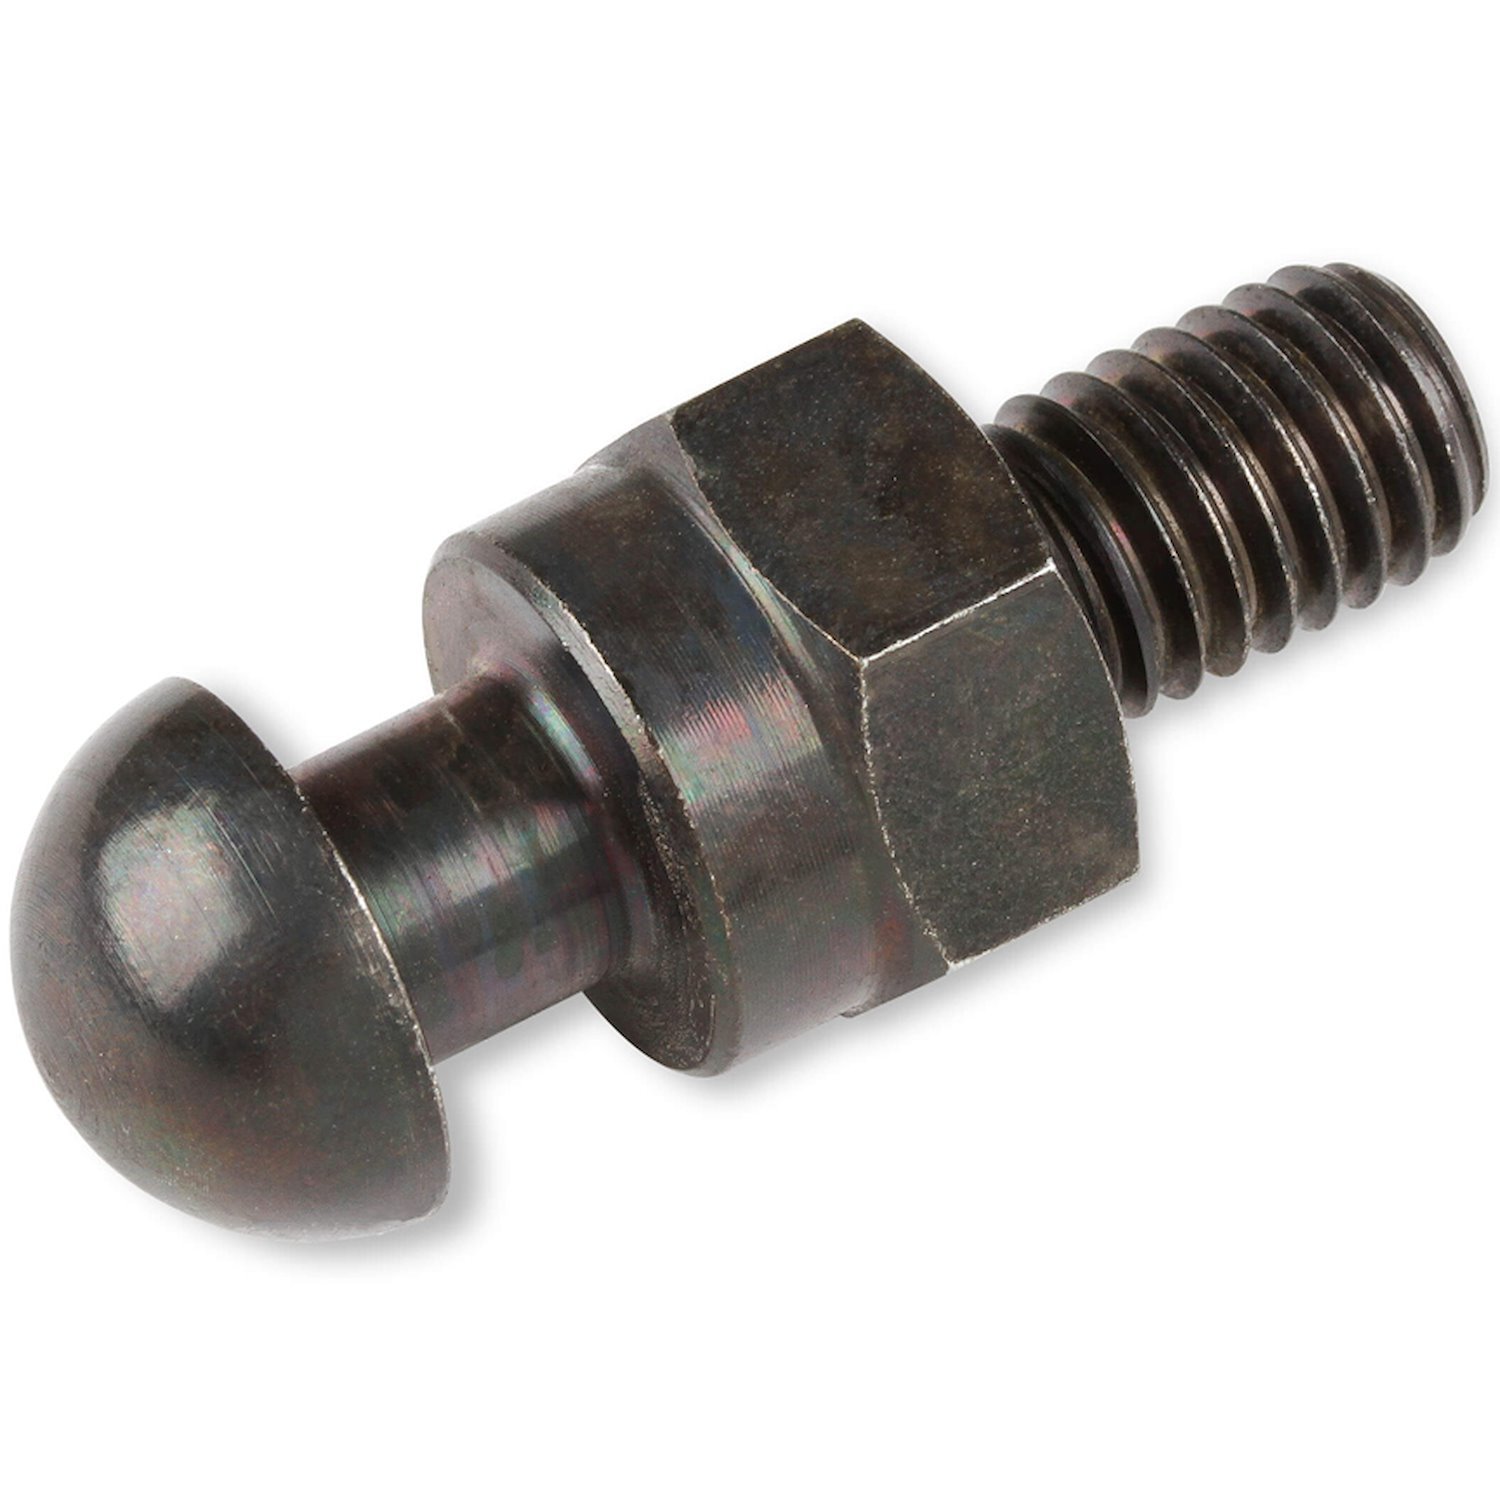 Clutch Pivot Ball Stud for 1996 Ford Mustang